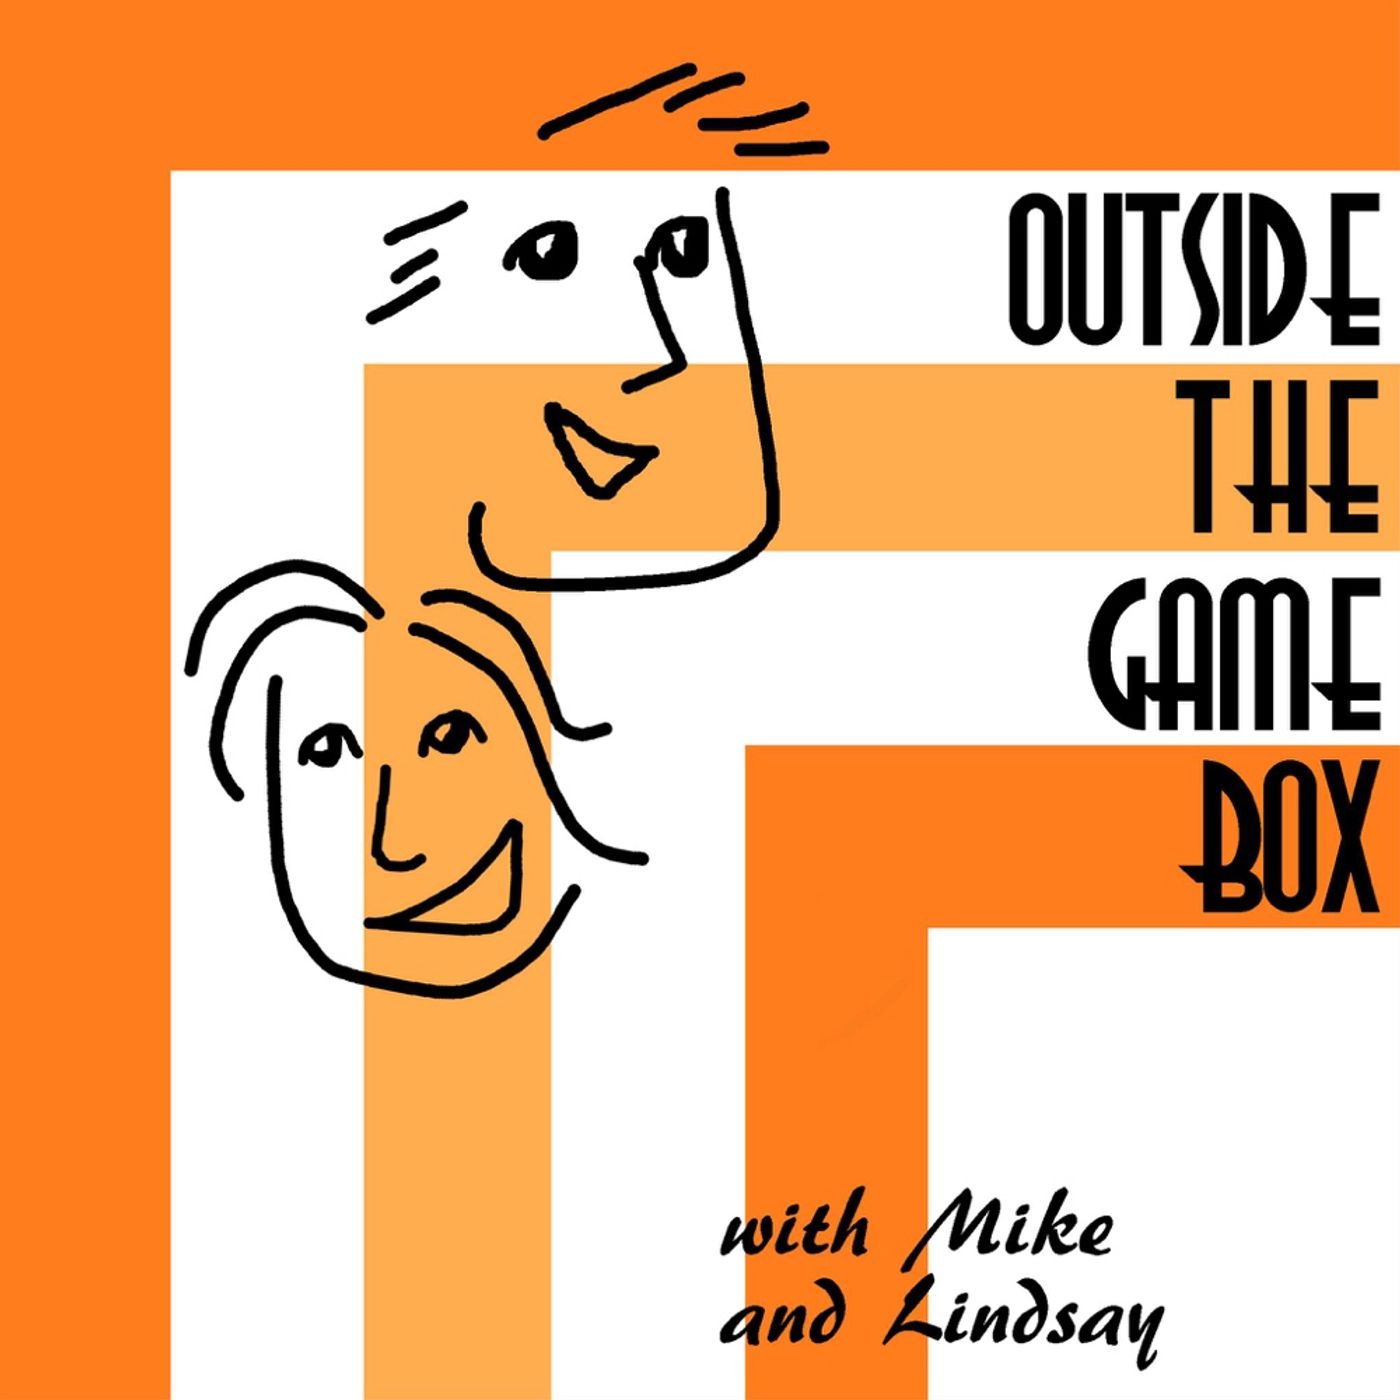 Outside the Game Box's tracks